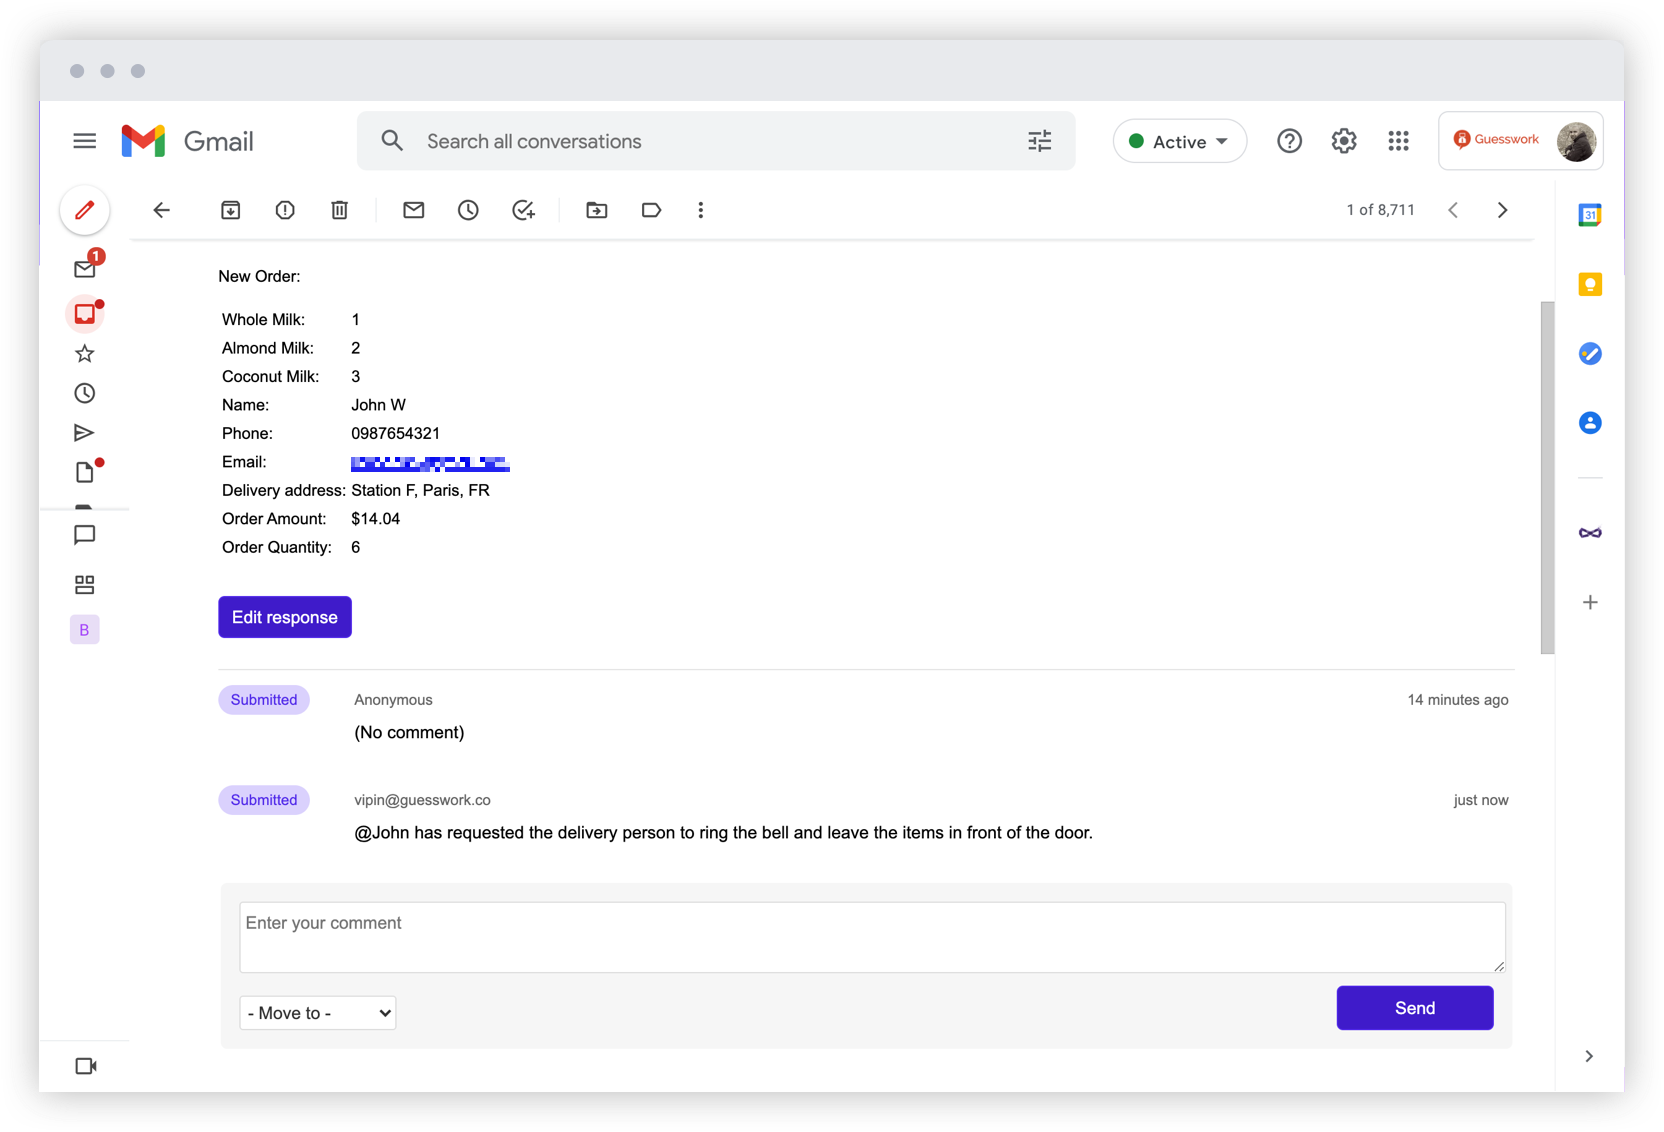 Collaborate with your team in real-time by adding notes to form responses and keep track of all conversations